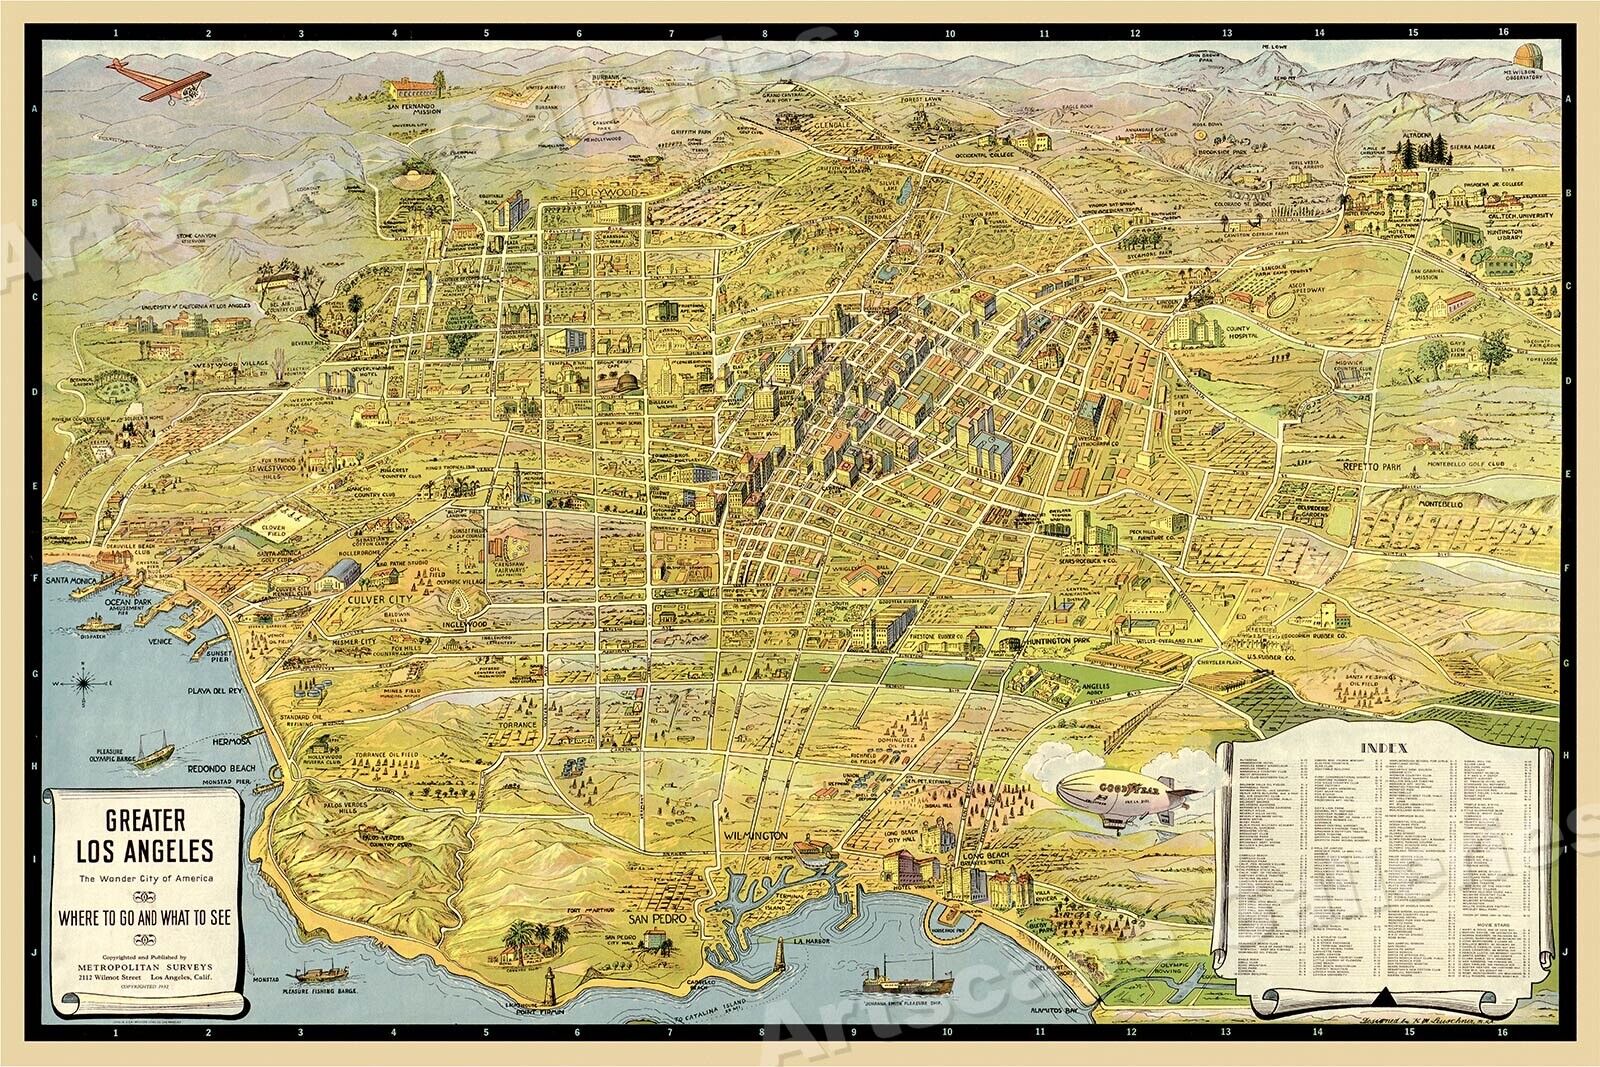 1932 Los Angeles Southern California Panoramic Sightseeing Map - 16x24